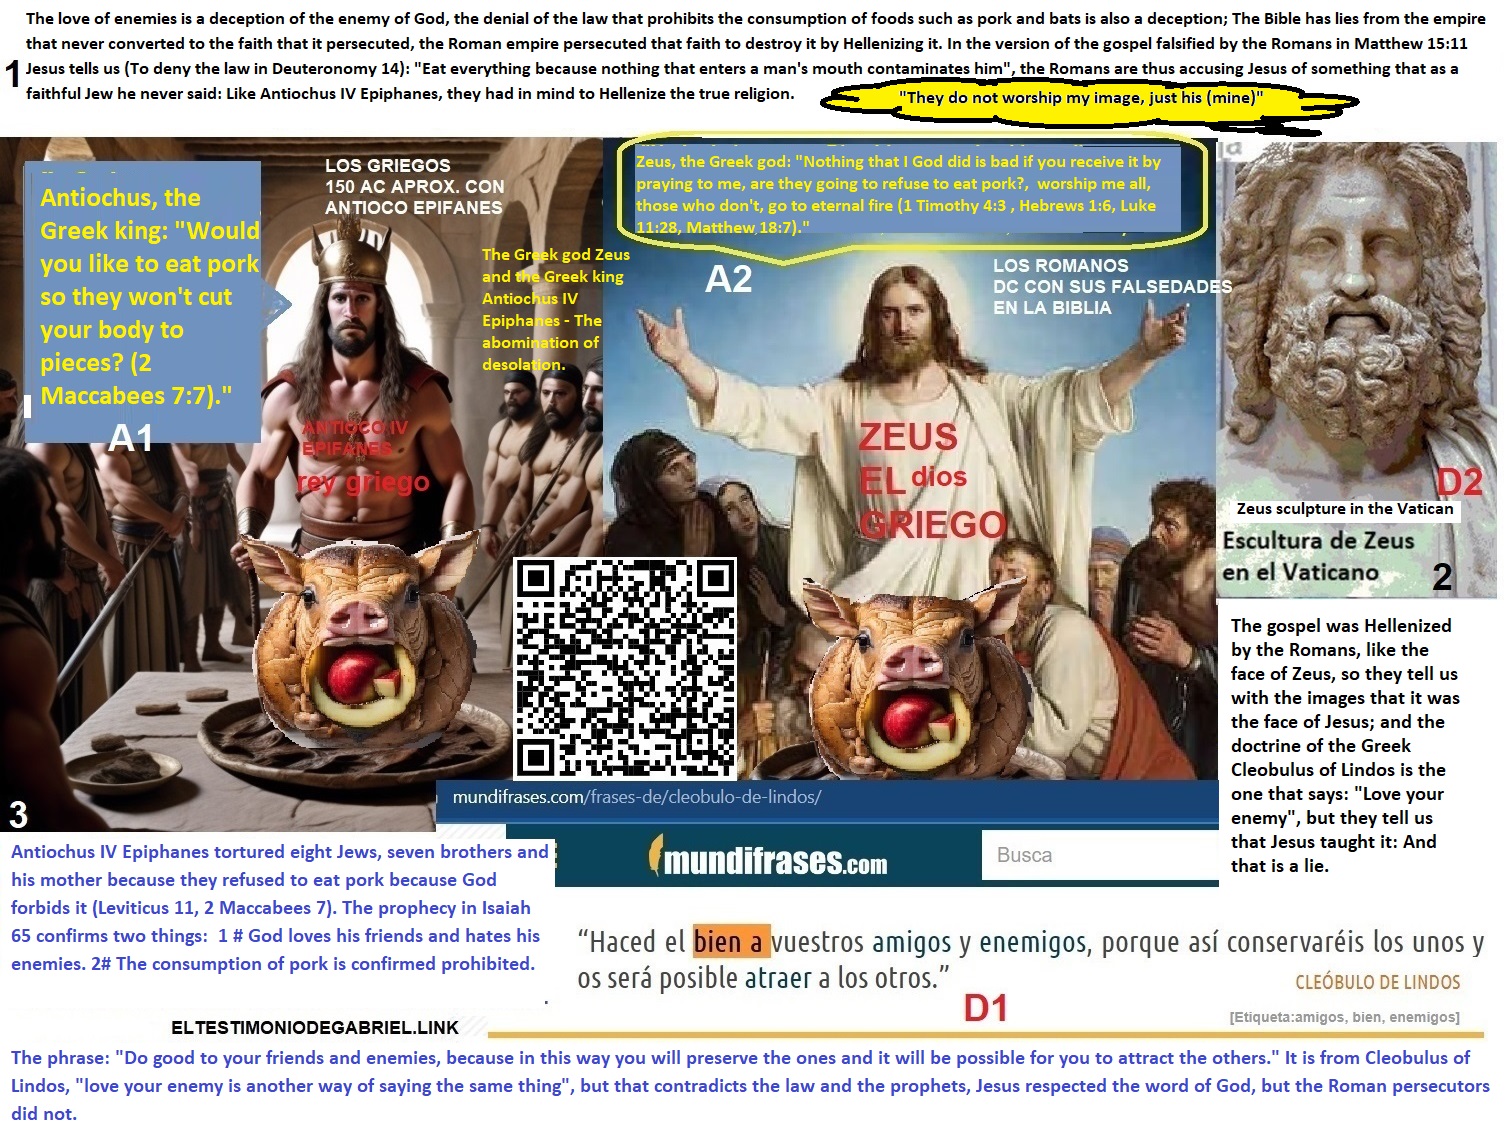 The Greek god Zeus and the Greek king Antiochus IV Epiphanes - The abomination of desolation.